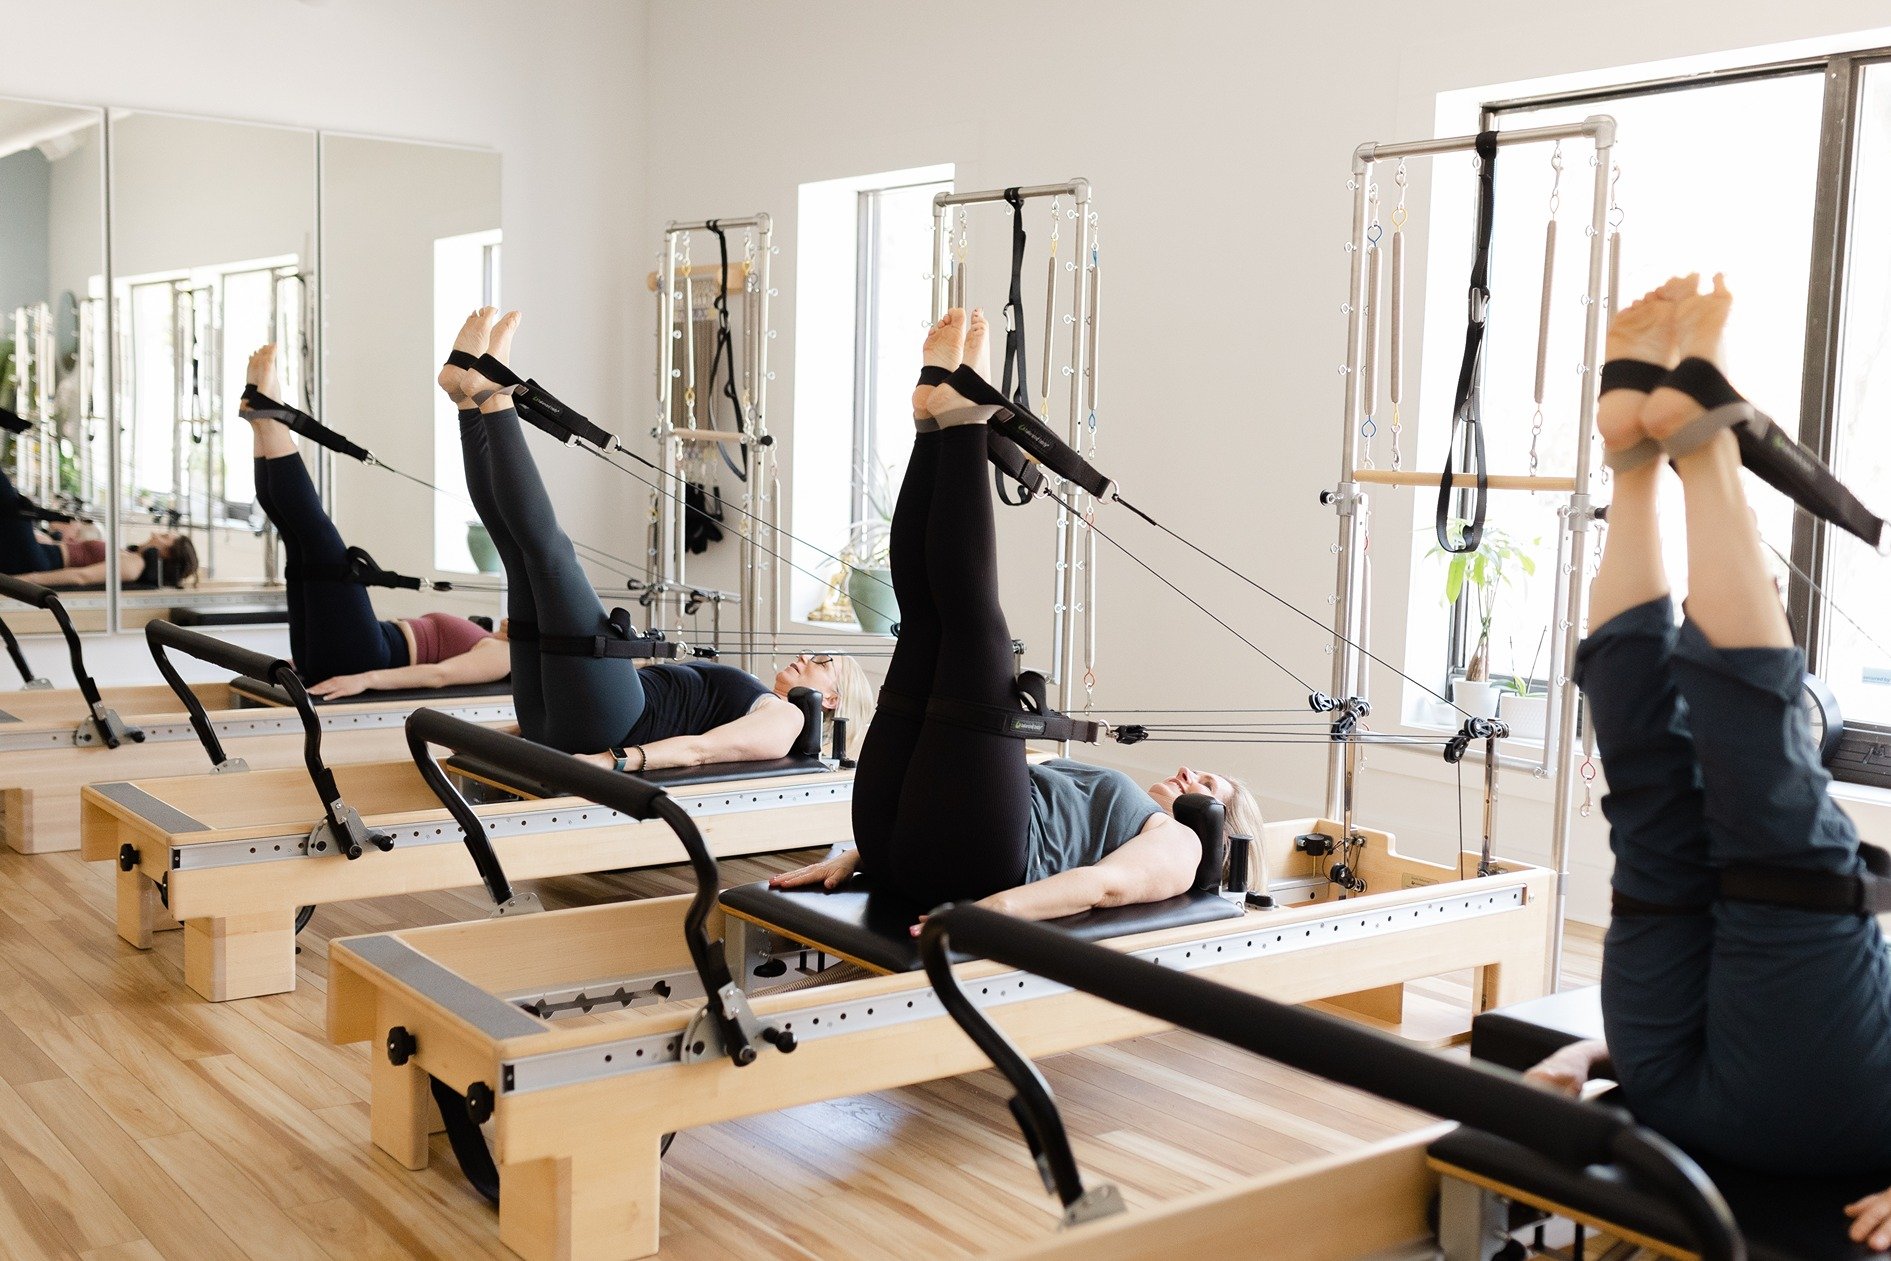 $49 For Or $69 For Semi-Private Pilates Reformer Classes, 44% OFF